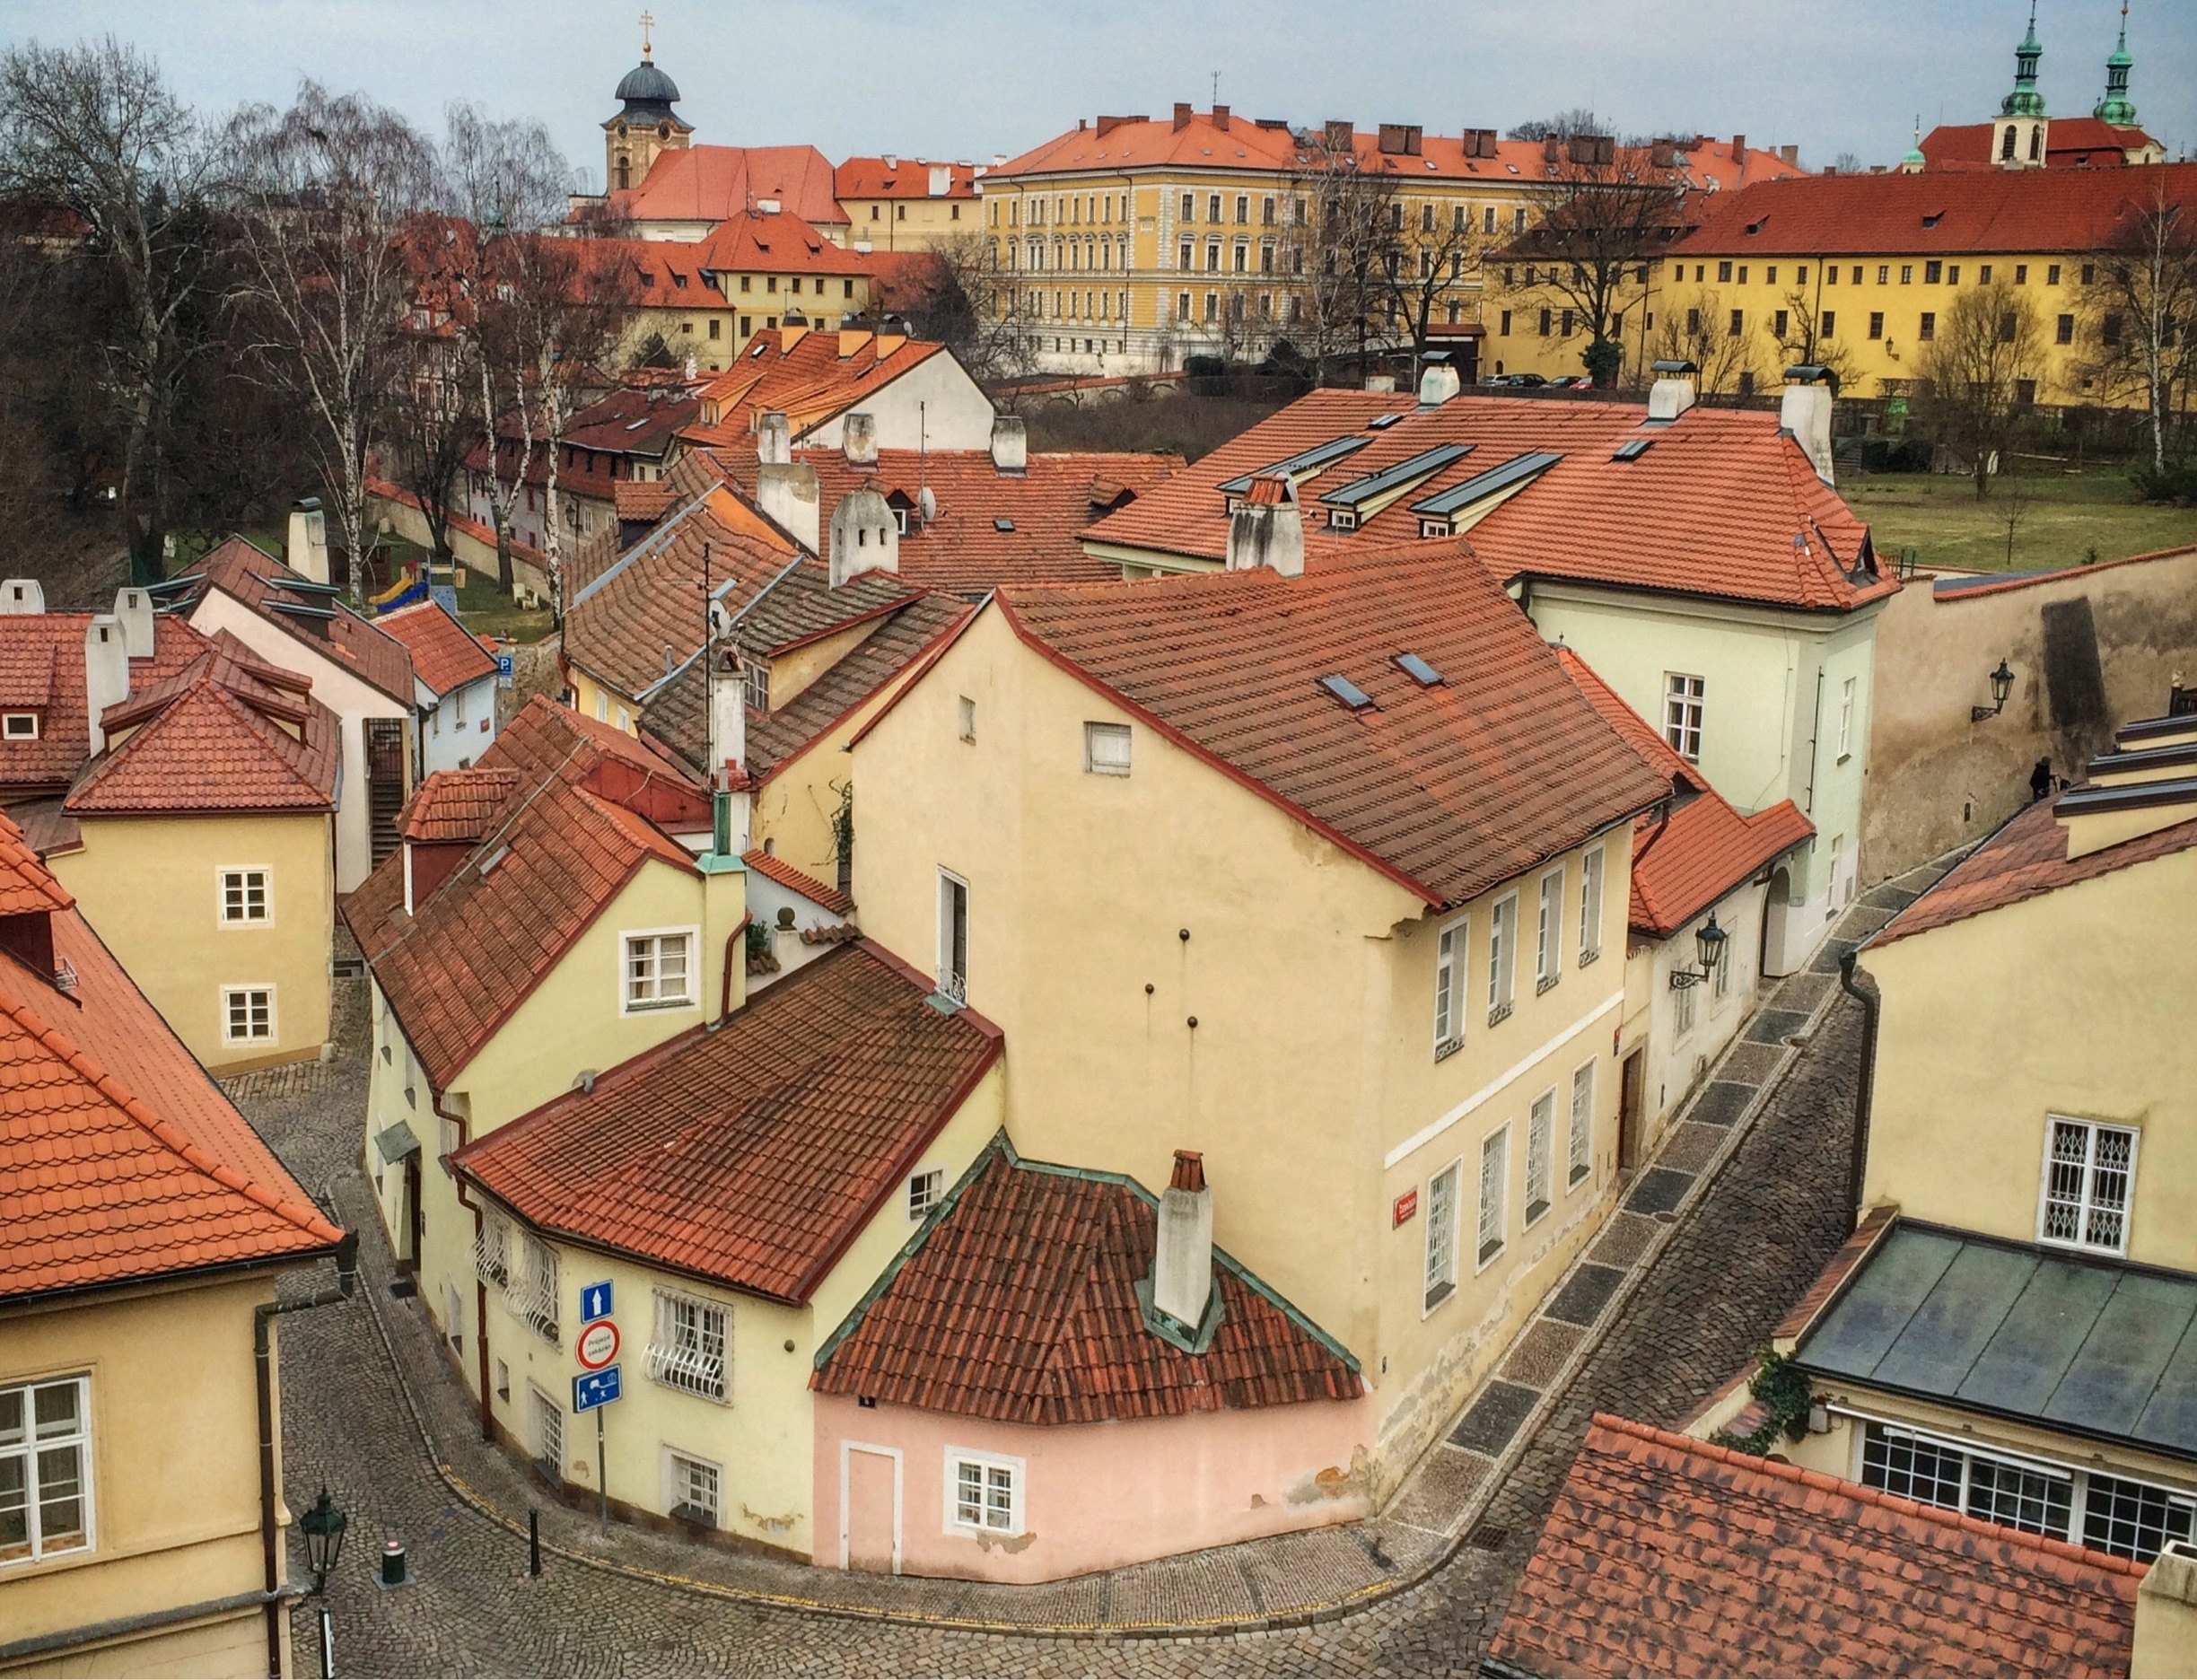 Take a break from all the crowds at the nearby Prague Castle to this tiny neighborhood (with wee houses!) dating back to the 14th century. It consists of just a few streets and has retained the quiet atmosphere of a small village within the busy city.